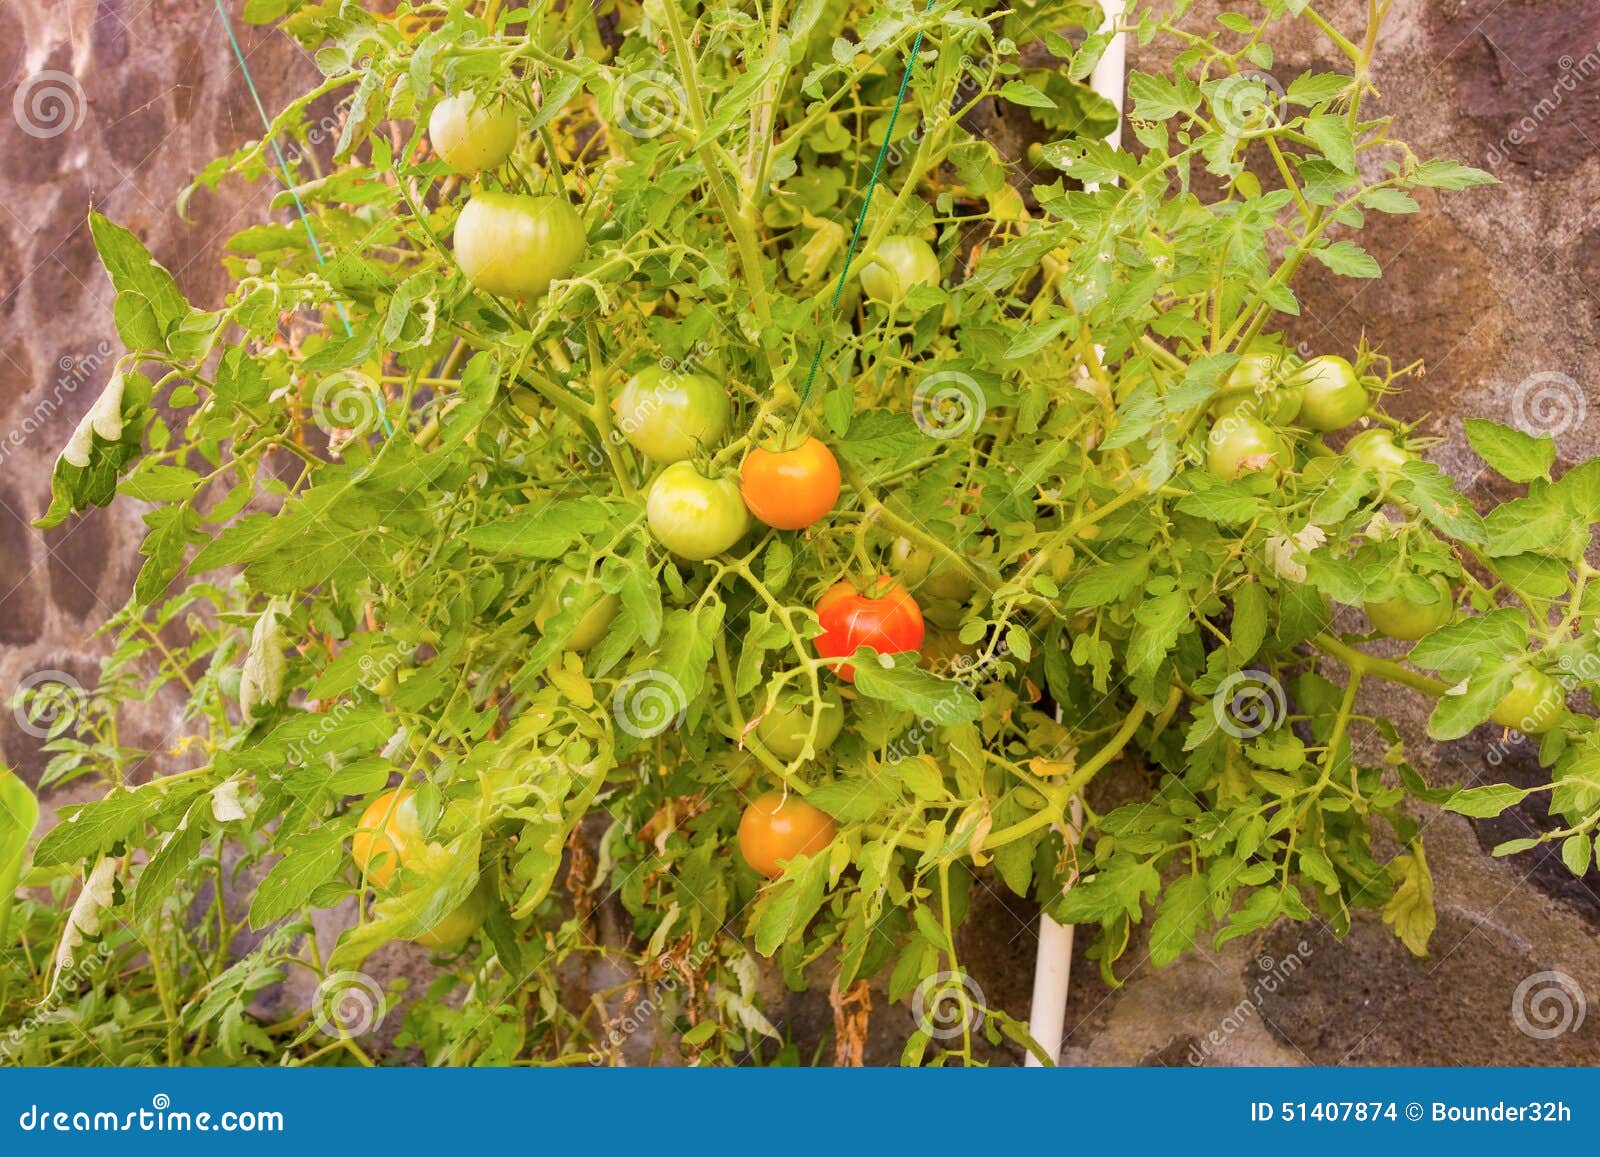 Tomatoes Growing At An Aquaponics Project In The Caribbean Stock Photo ...